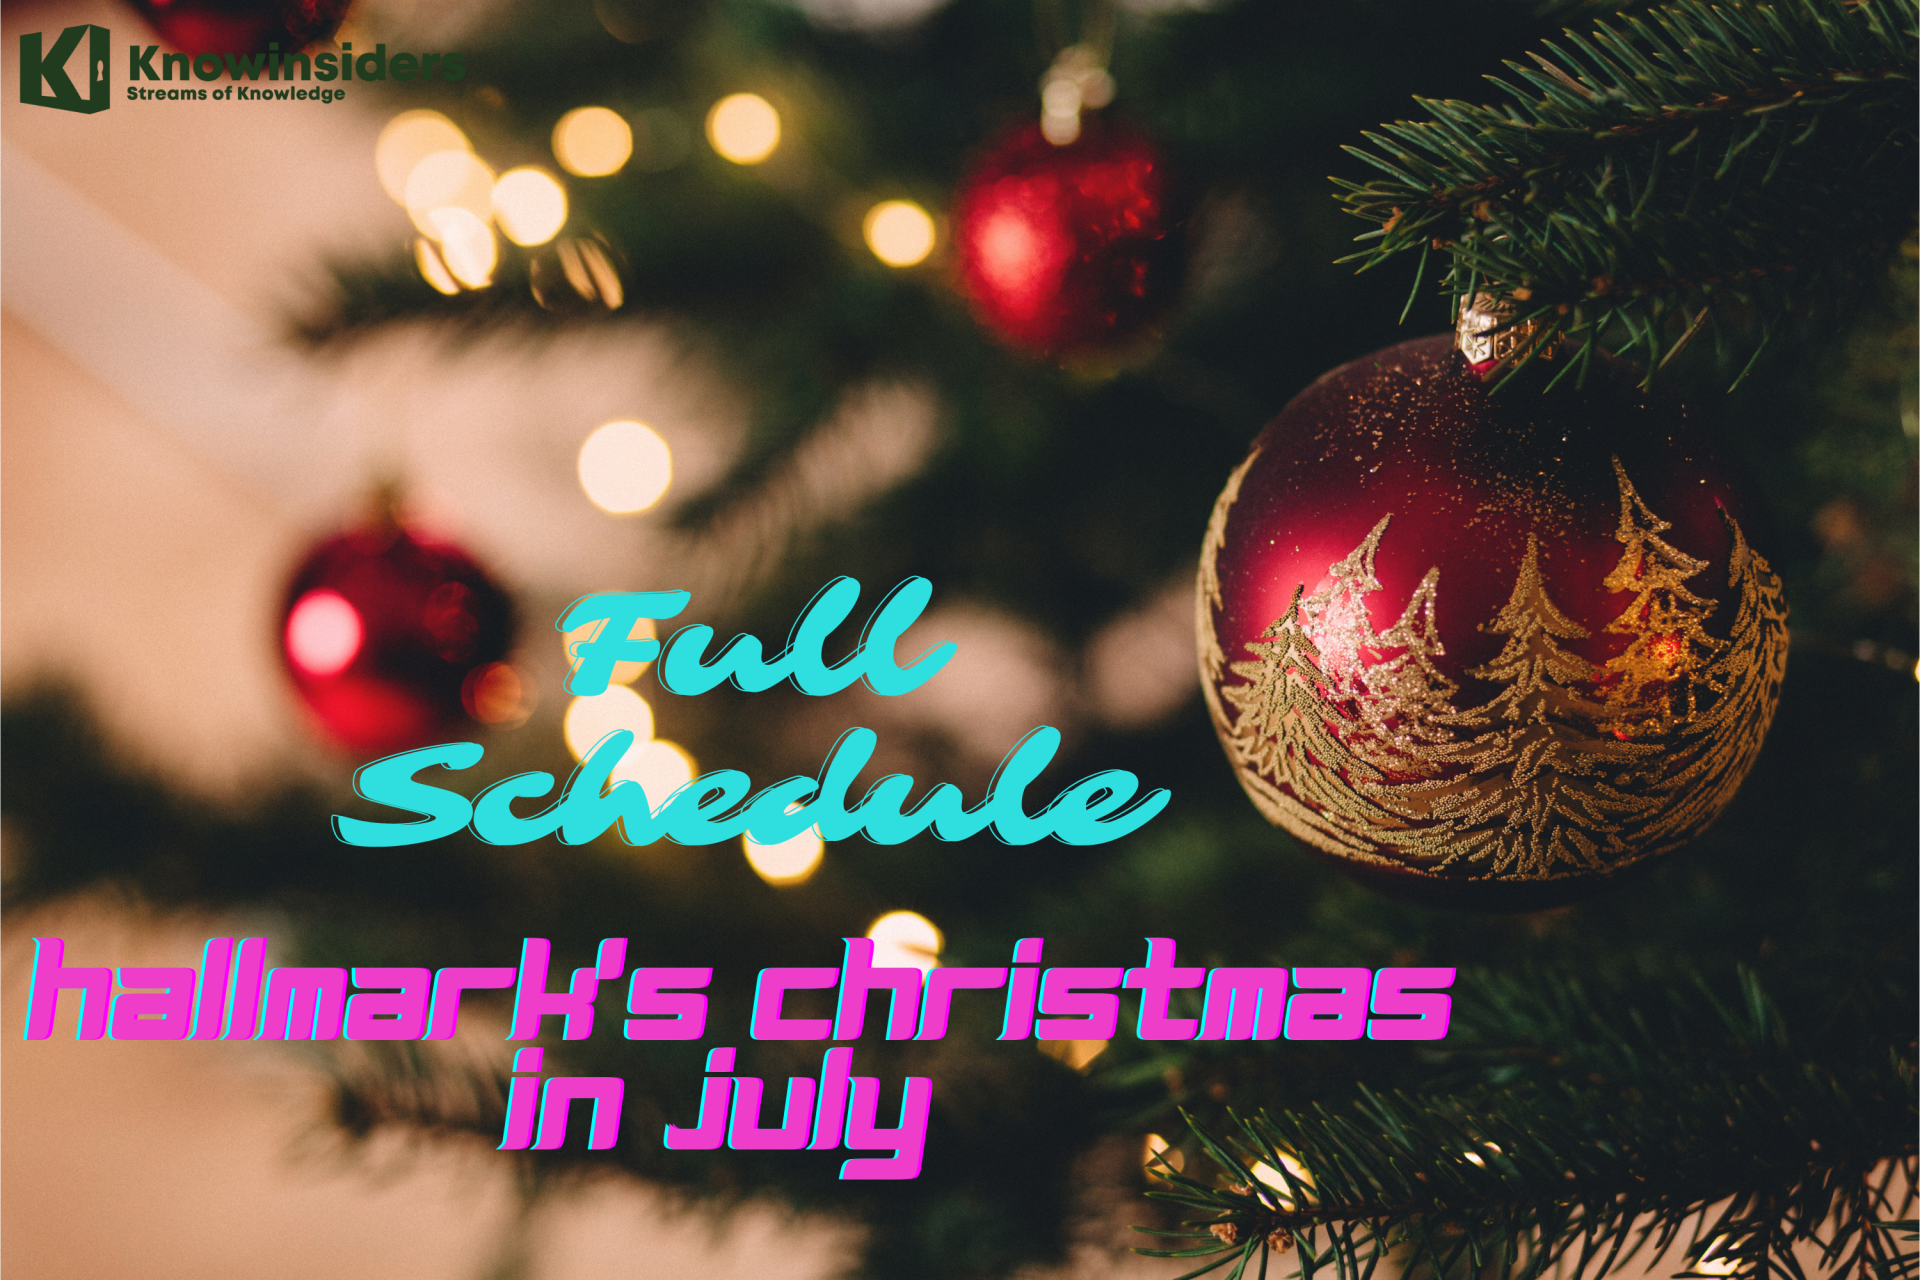 The Full Schedule of Hallmark’s Christmas in July 2021